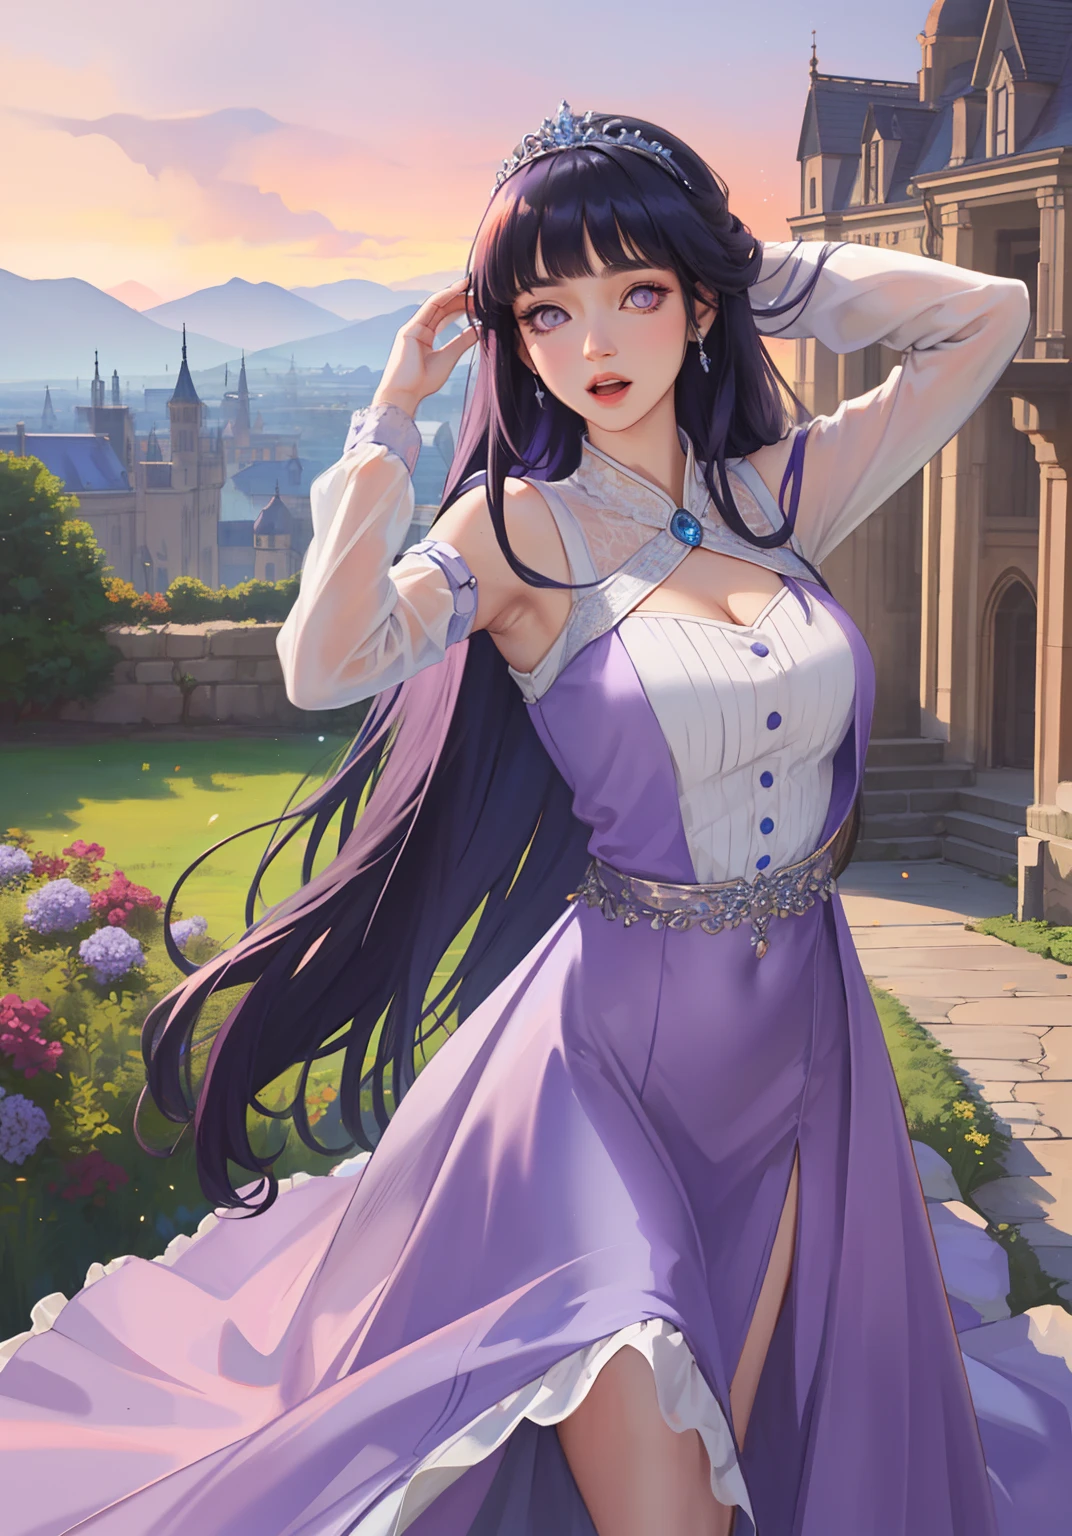 (RapunzelWaifu:1), surprised, beautiful pose, looking at the viewer, thick thighs, (long soft purple dress:1.2), (very very long hair, tiara) :D,curvy,

(realistic: 1.2), (realism), (masterpiece: 1.2), (best quality), (ultra detailed), (8k, 4k, intricate), (full-body-shot: 1), (Cowboy-shot: 1.2), (85mm), light particles, lighting, (highly detailed: 1.2), (detailed face: 1.2), (gradients), sfw, colorful, (detailed eyes: 1.2),

(detailed landscape, garden, plants, castle: 1.2), (detailed background), detailed landscape, (dynamic angle: 1.2), (dynamic pose: 1.2), (rule of third_composition: 1.3), (line of action: 1.2), wide shot, daylight, soil, Blunt Bangs, purple eyes,dark blue hair